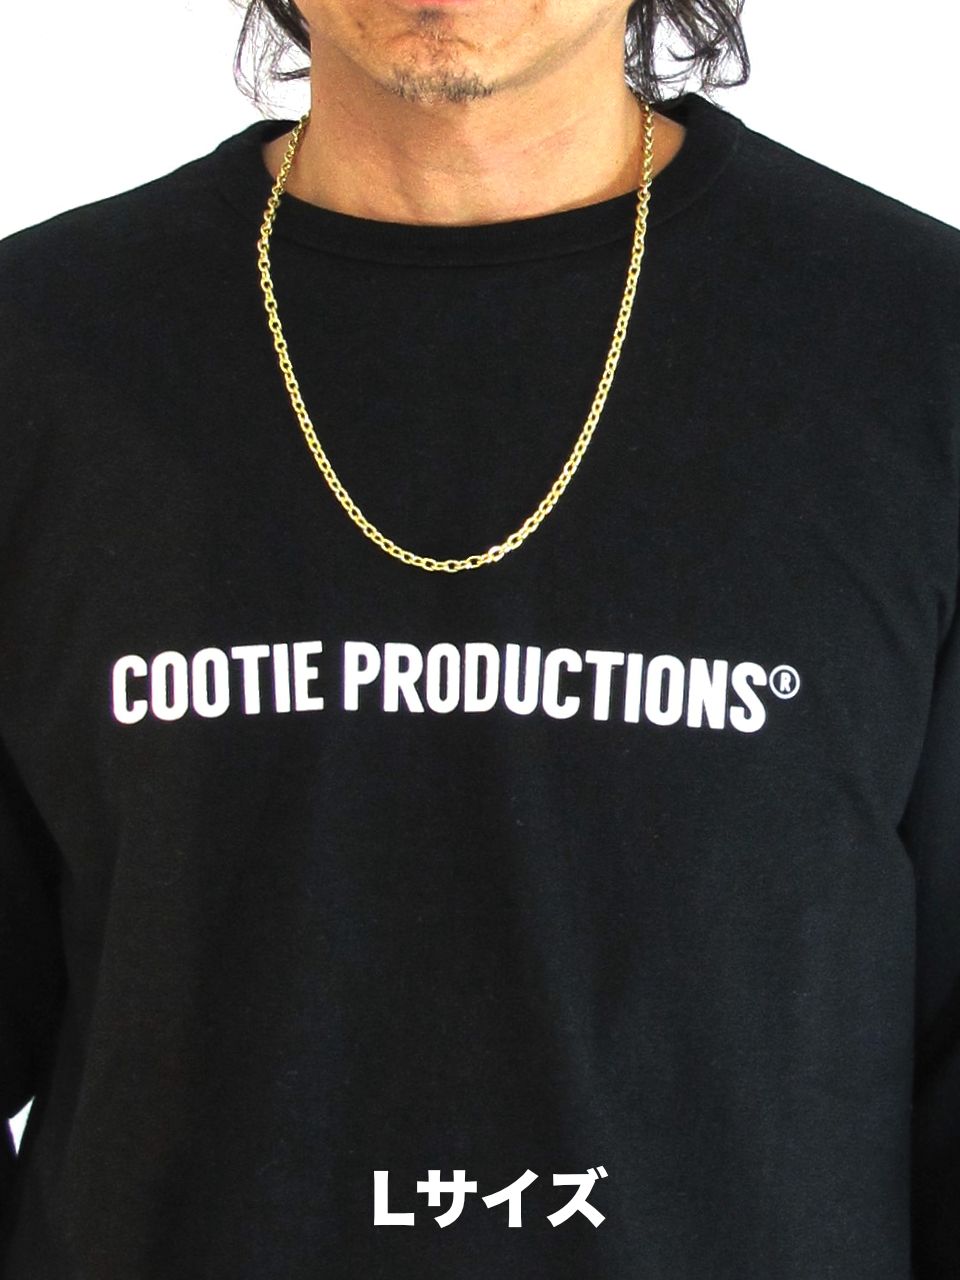 COOTIE PRODUCTIONS - CHINGON NECKLACE (GOLD) / チェーンネックレス